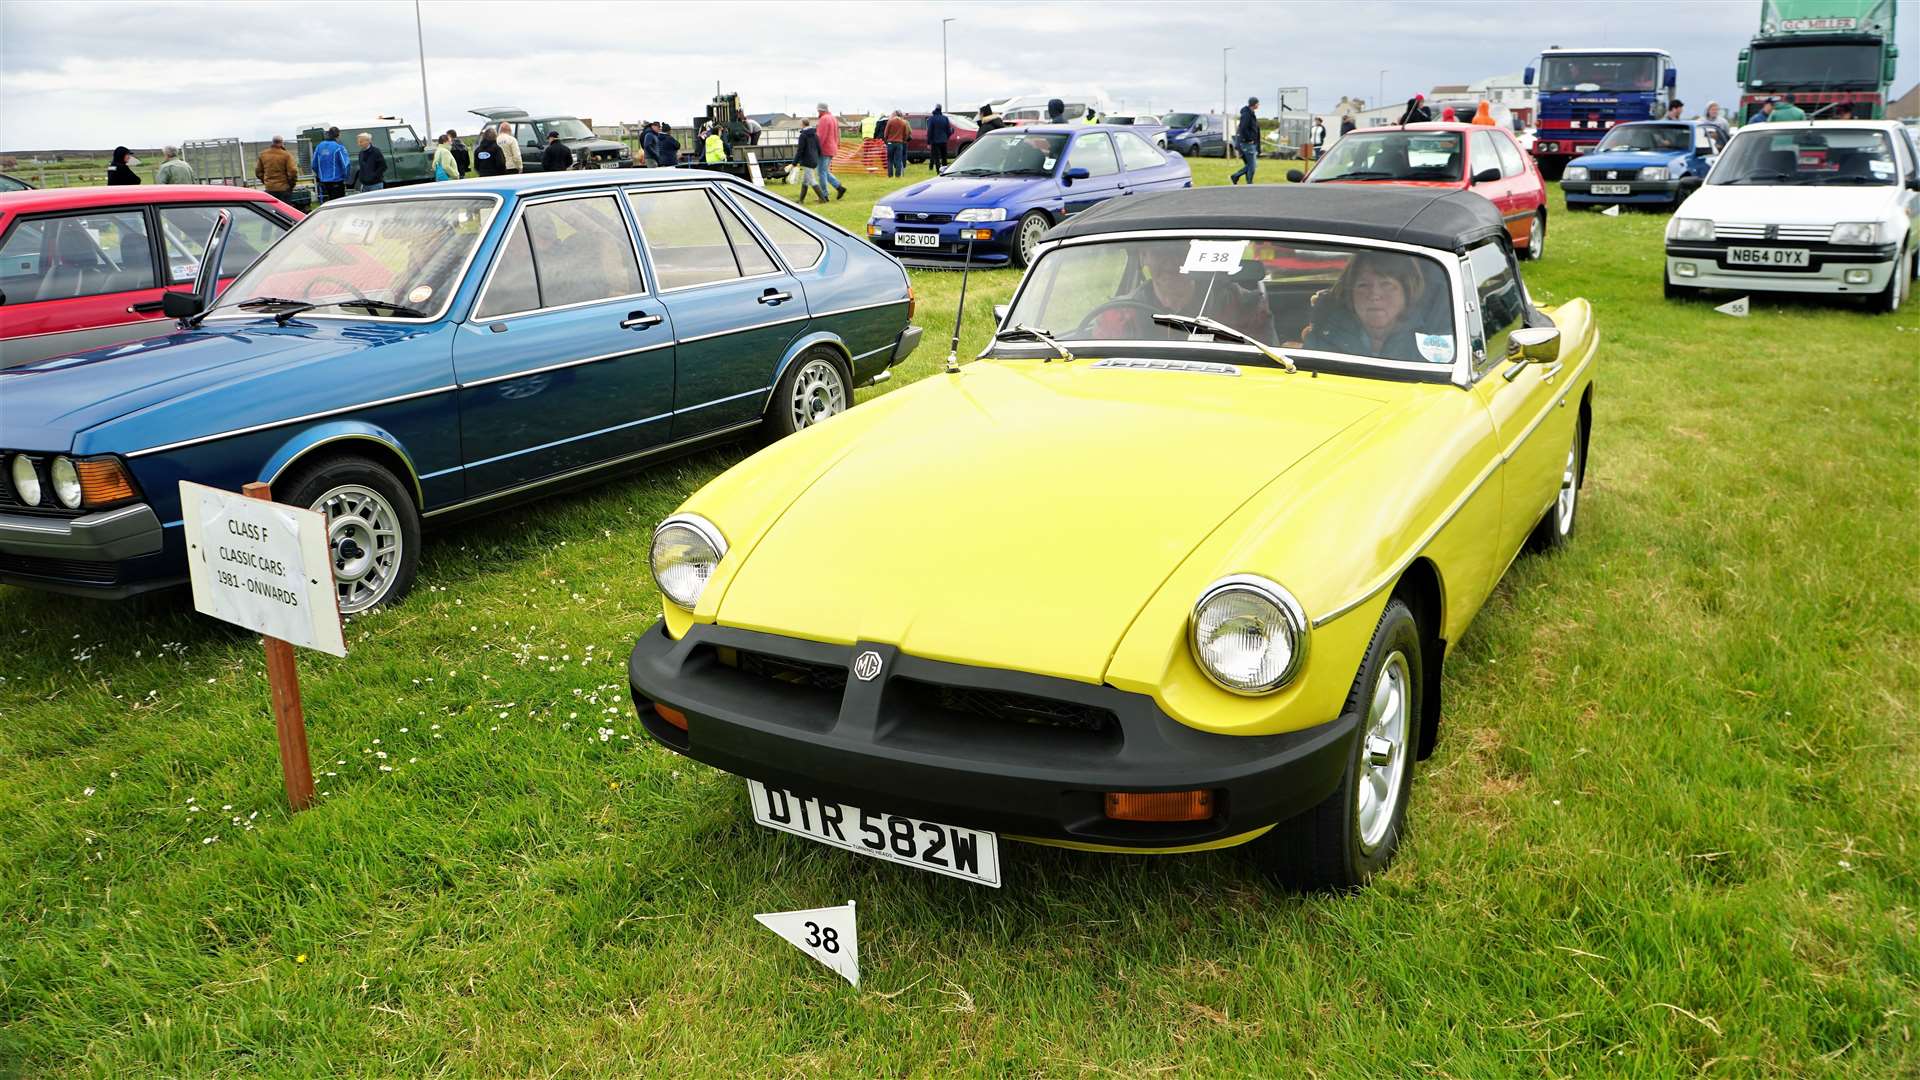 A lovely primrose yellow MG MGB Roadster from 1981 owned by John Forbes, Wick.